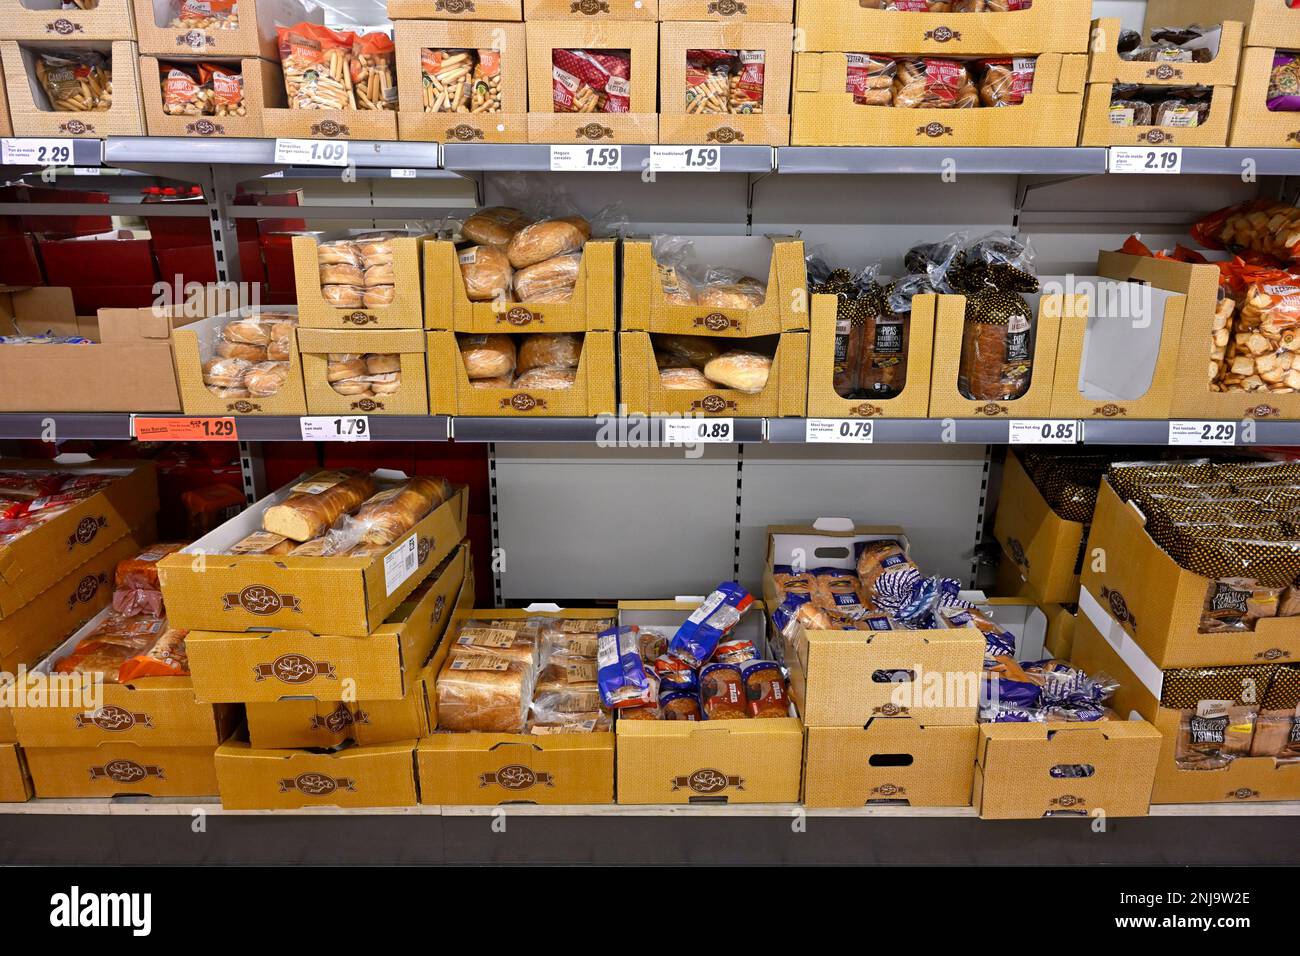 Supermarket shelves with backed goods wrapped in packing for hygiene Stock Photo